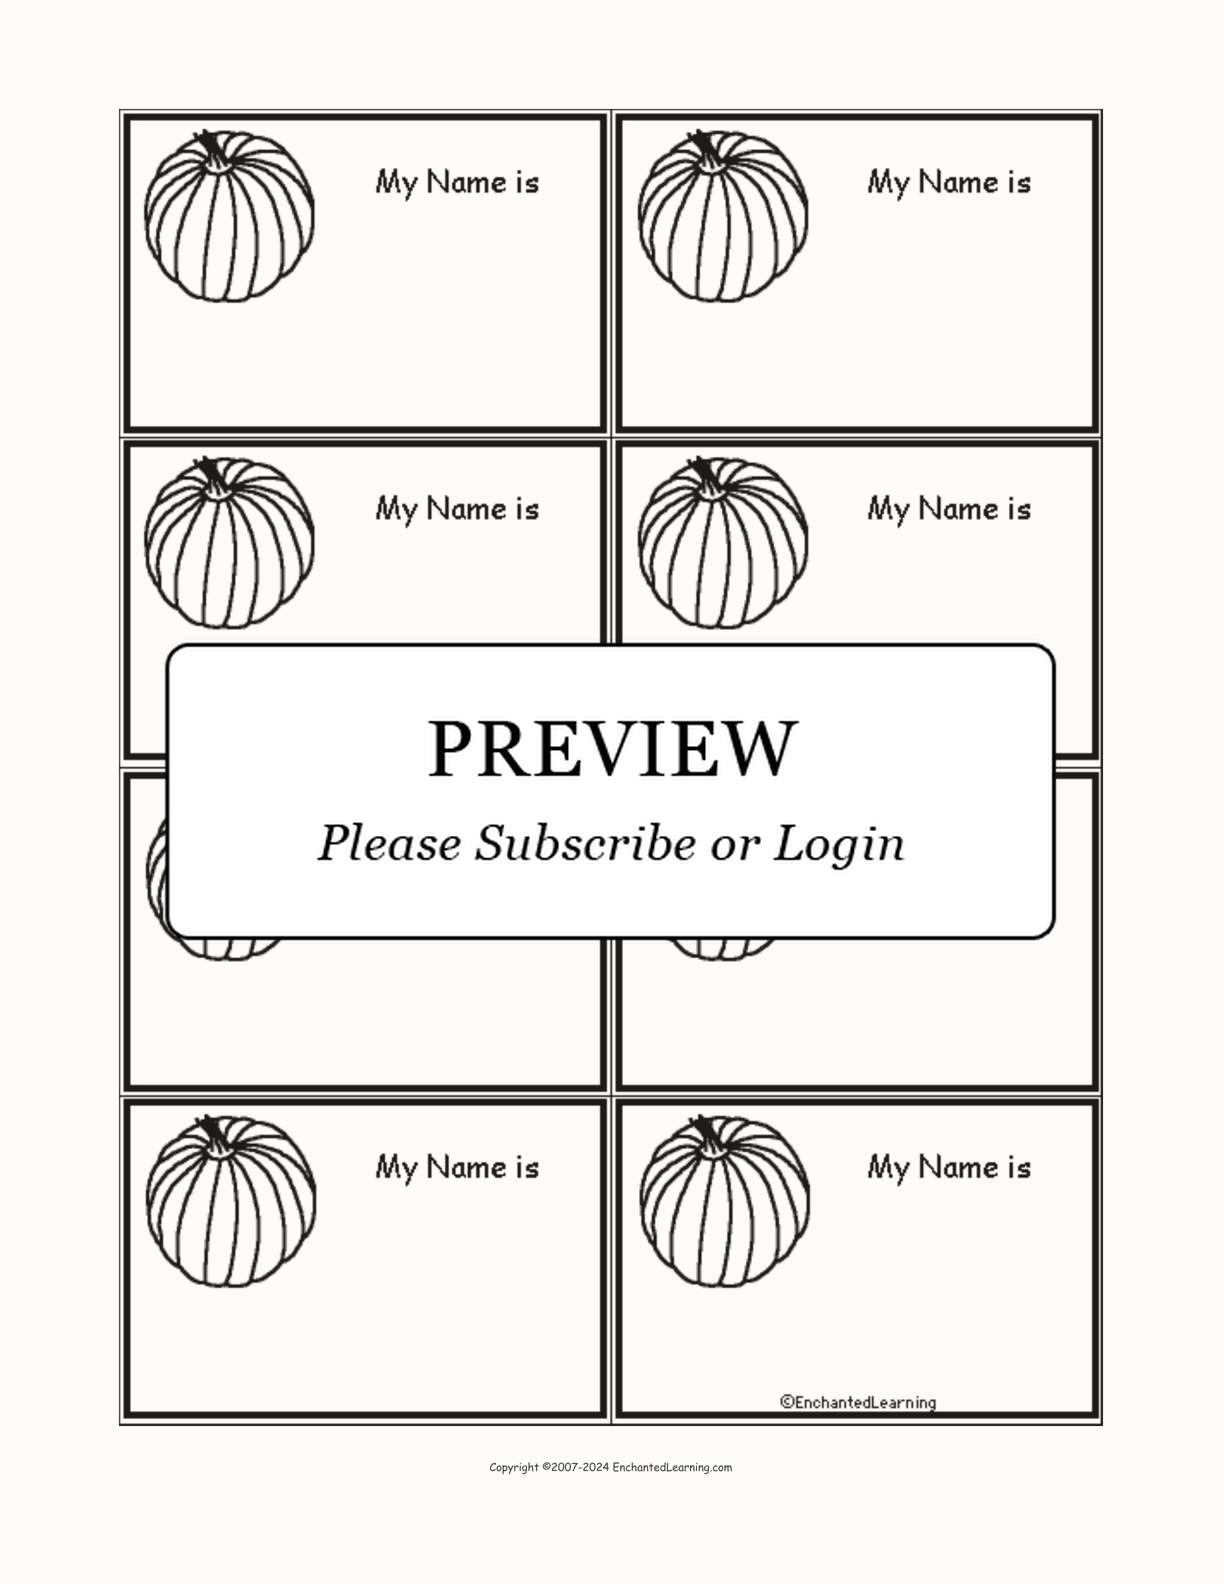 Pumpkin Nametags to Print (in Black and White) interactive printout page 1